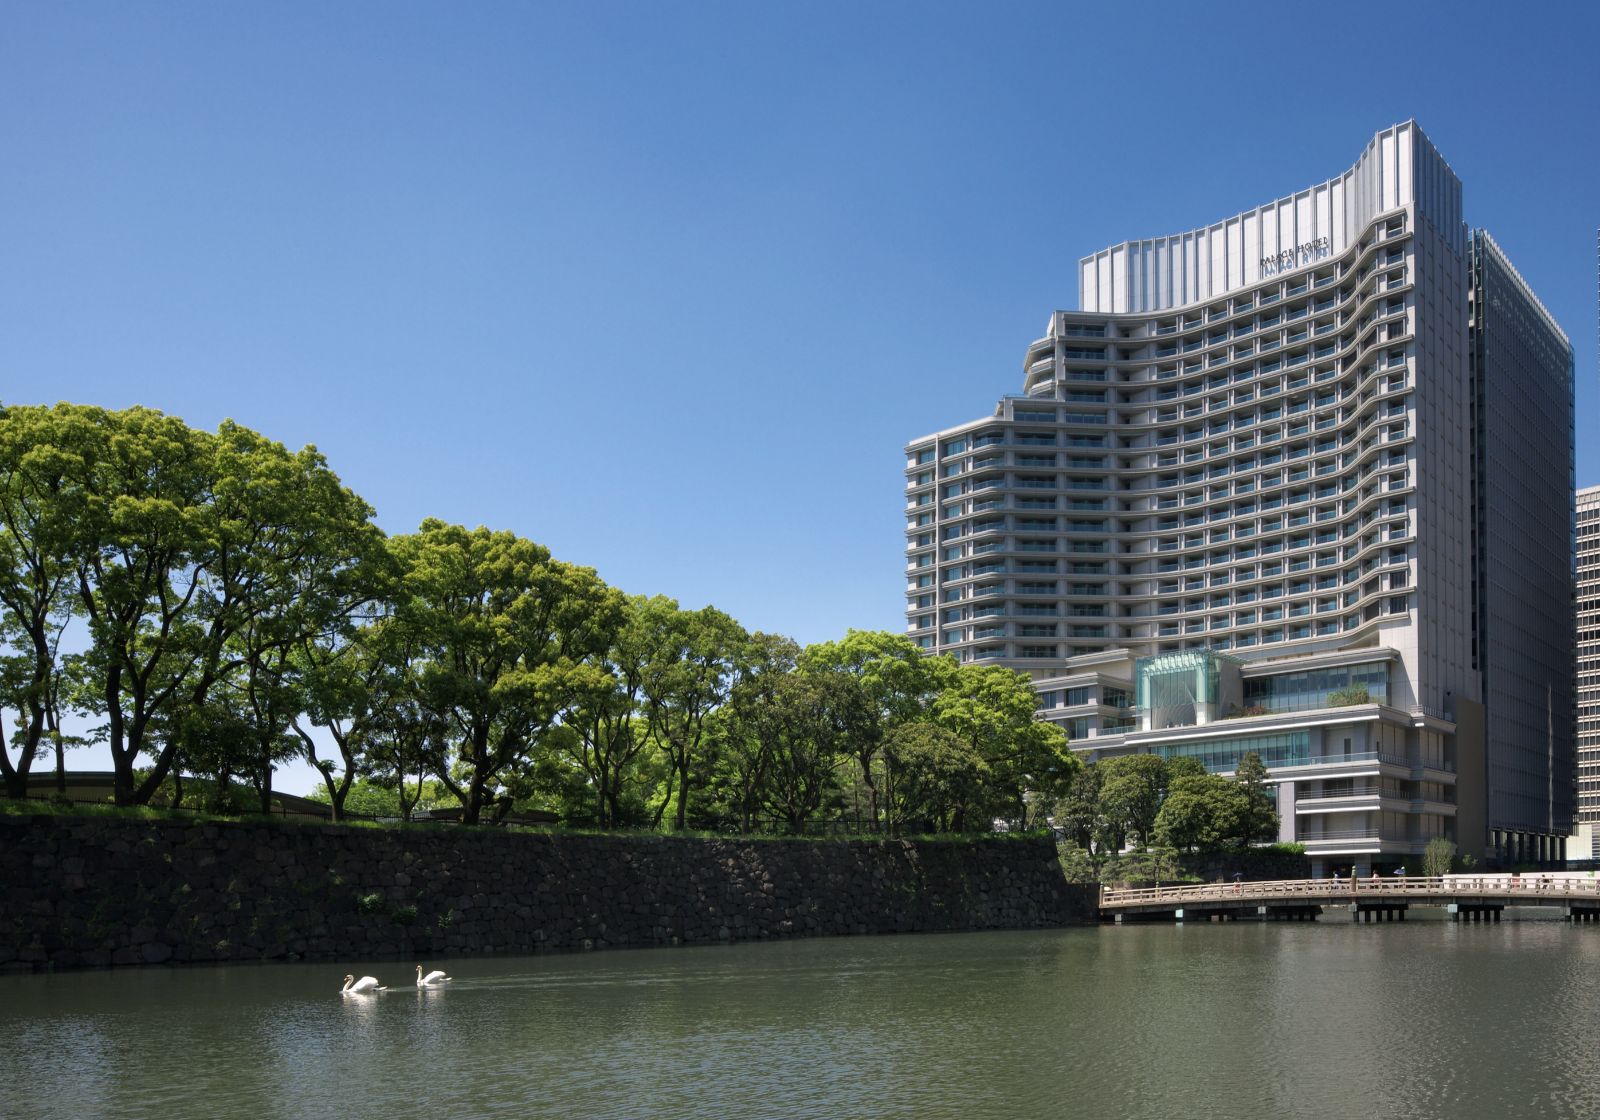 Exterior view of the Palace Hotel Tokyo